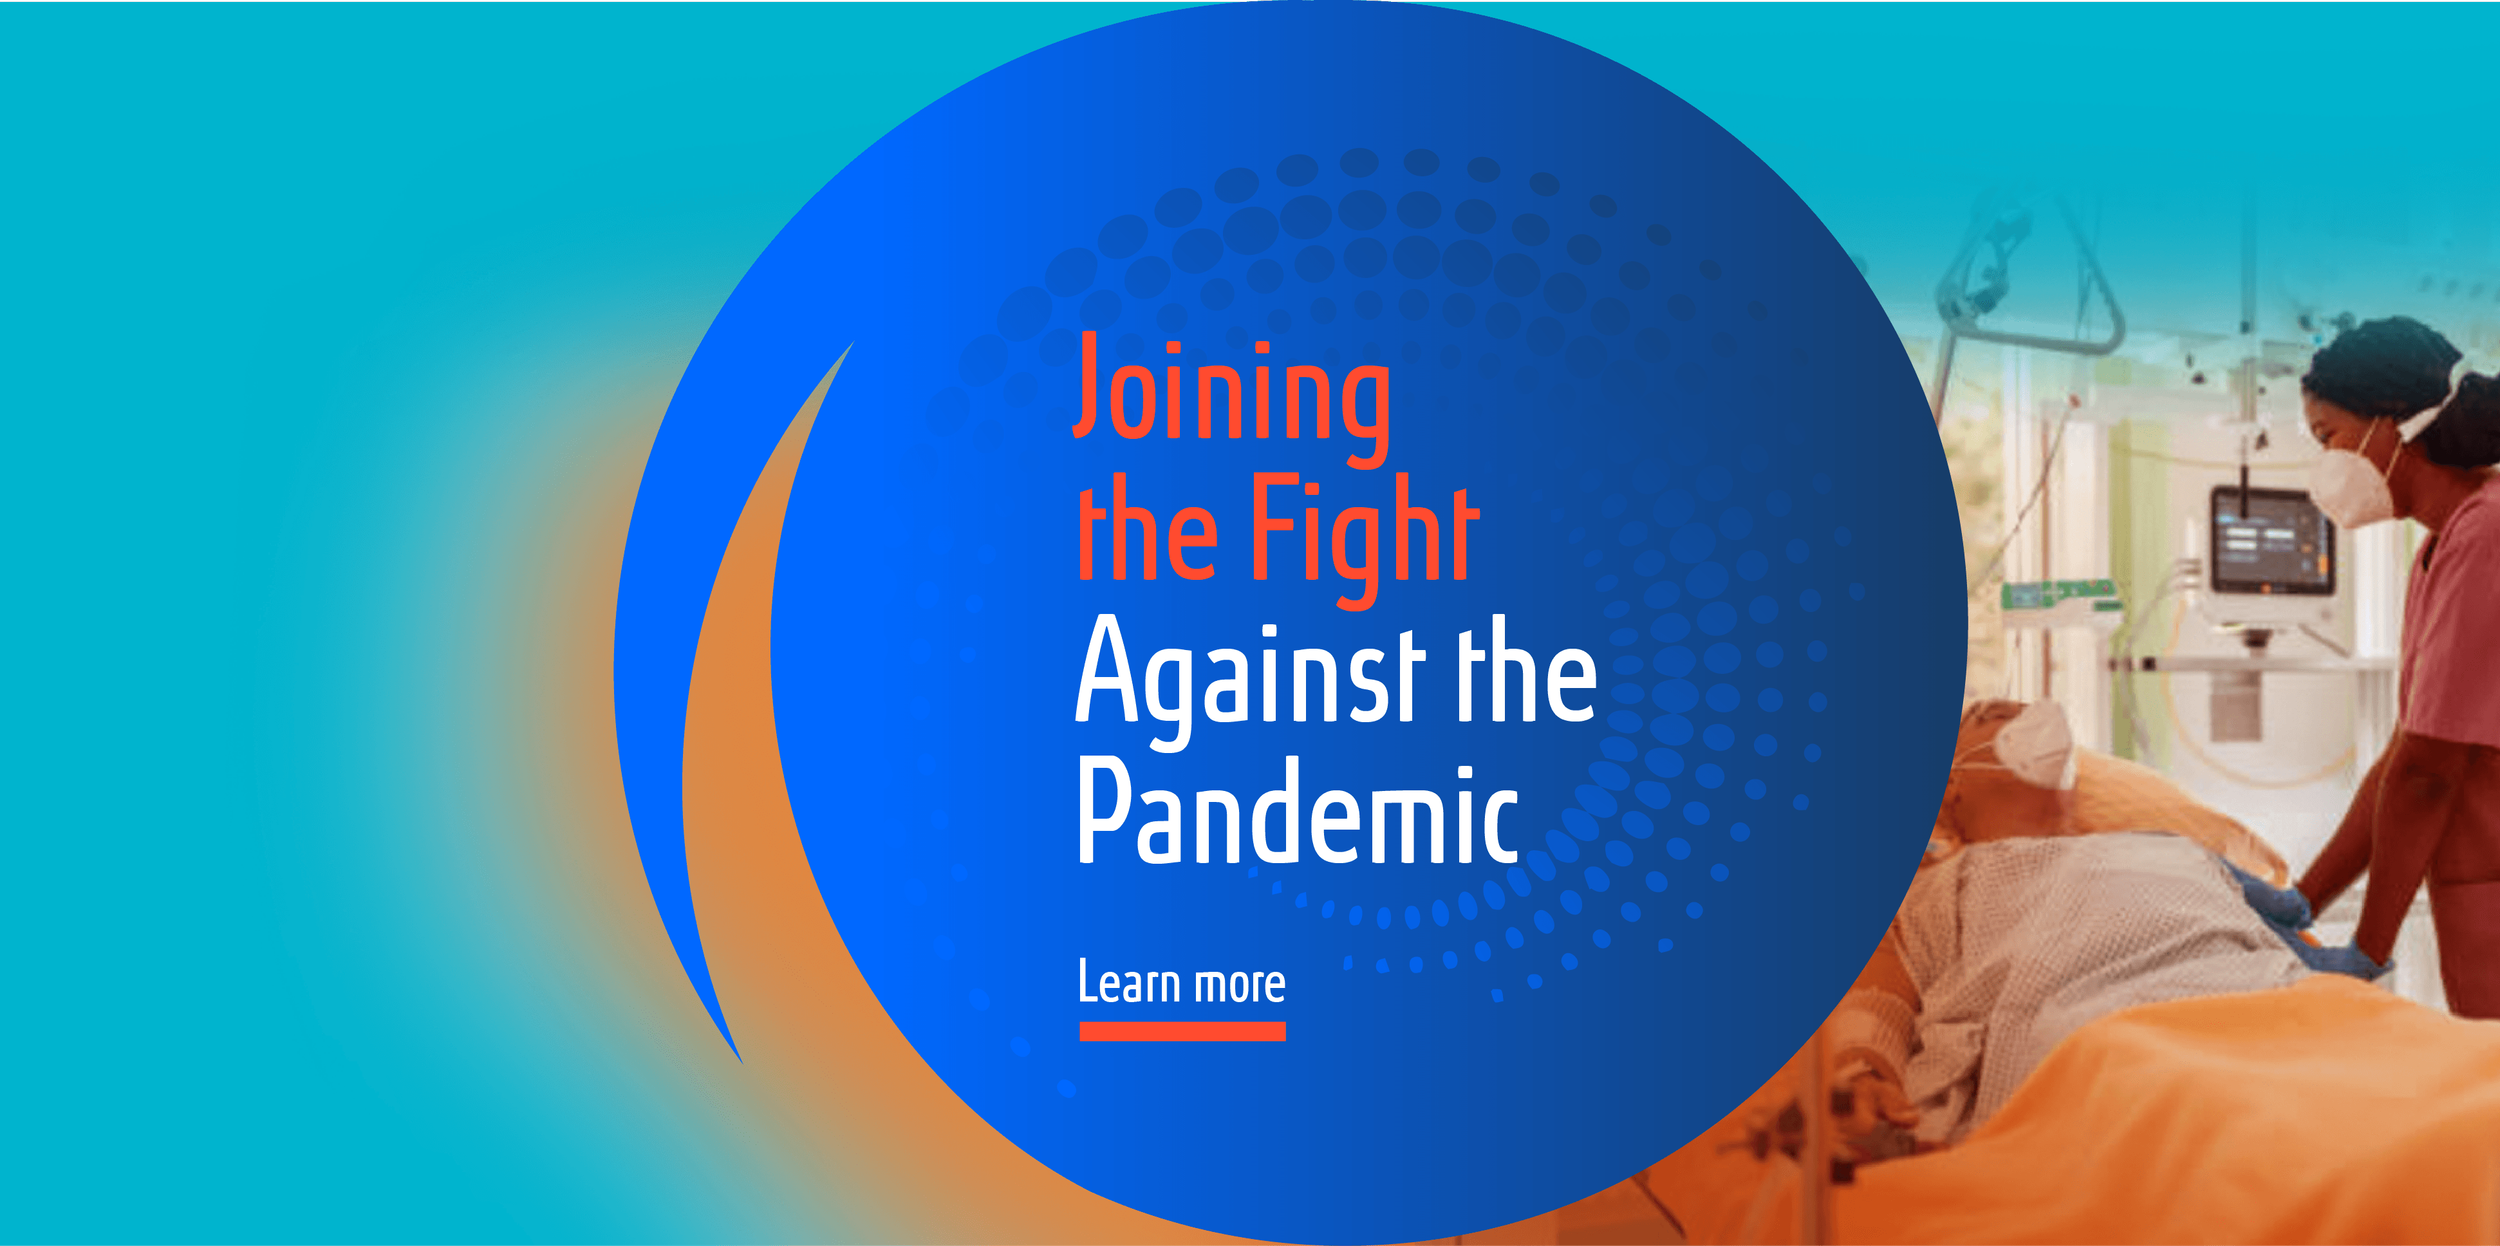 Joining the Fight Against the Pandemic